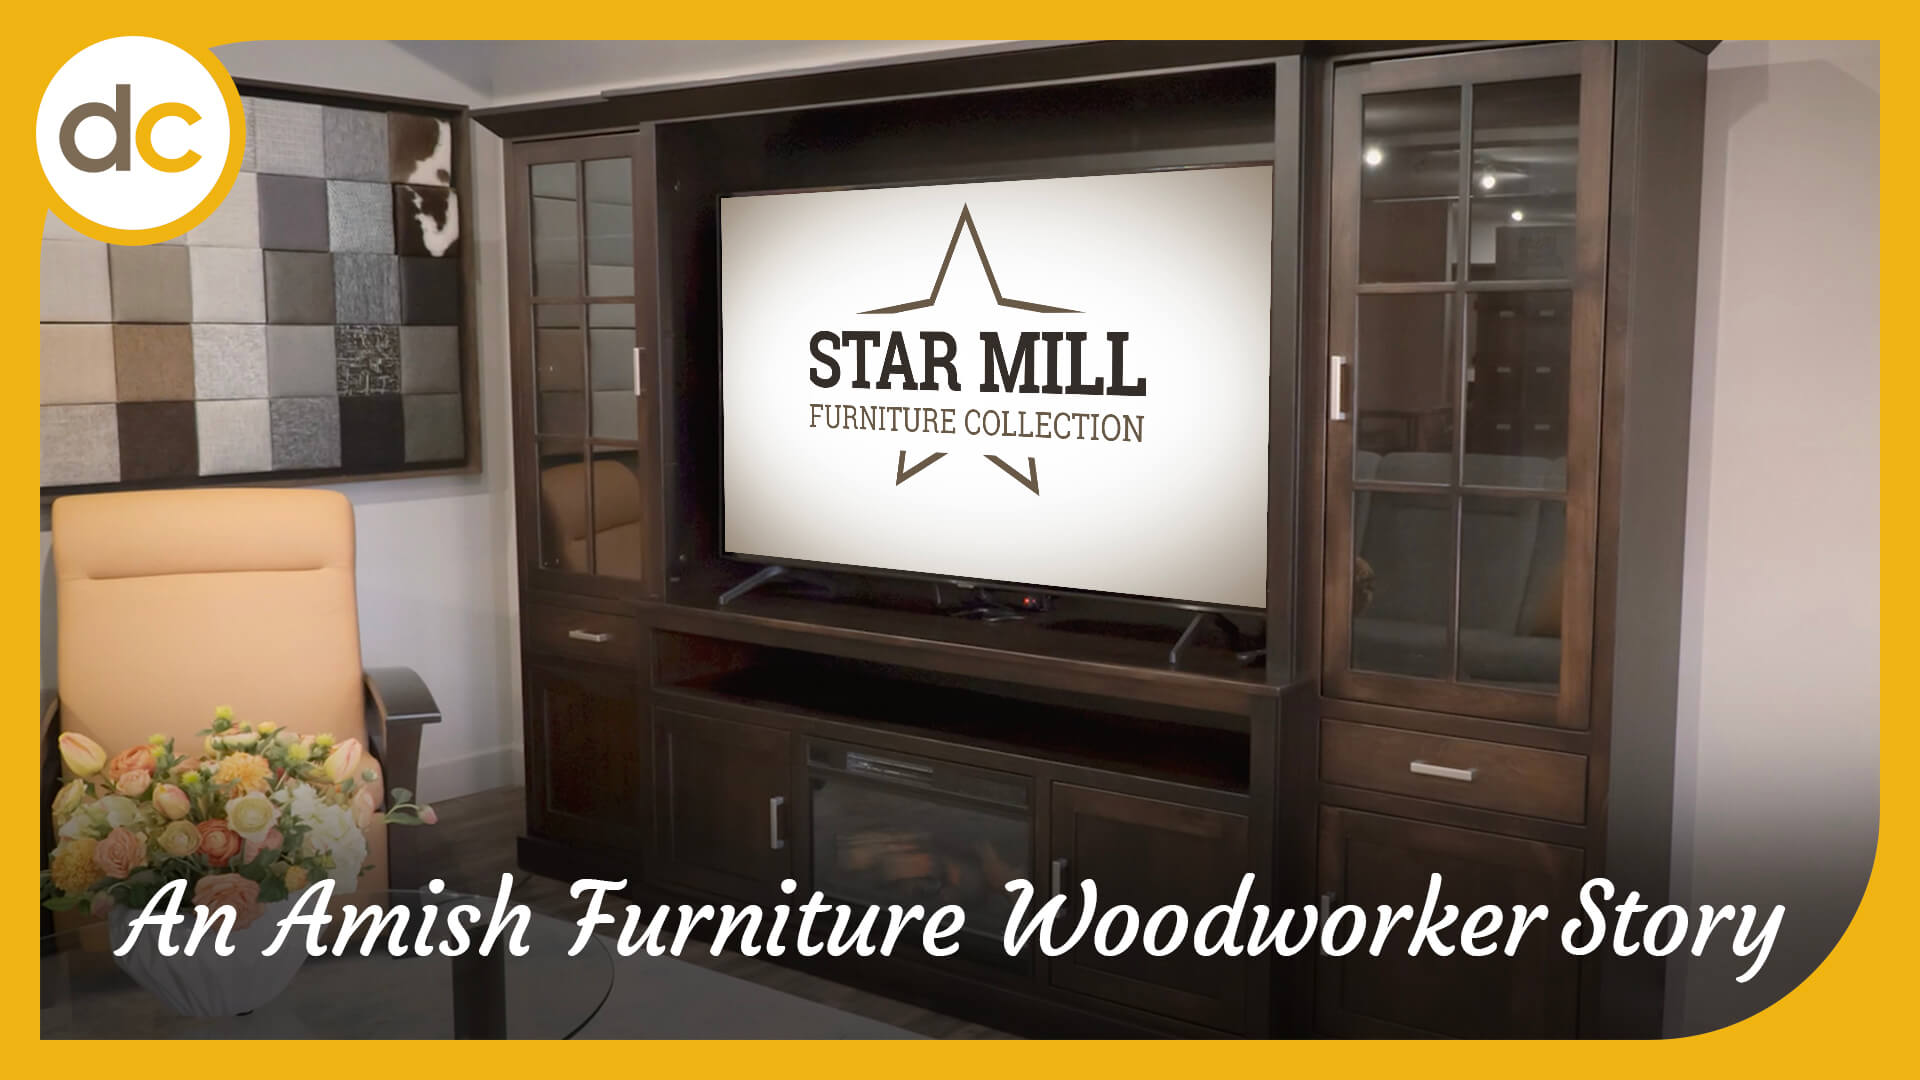 Video Title for Star Mill Furniture Collection, An Amish Furniture Woodworker Story featuring a large solid wood fireplace entertainment center